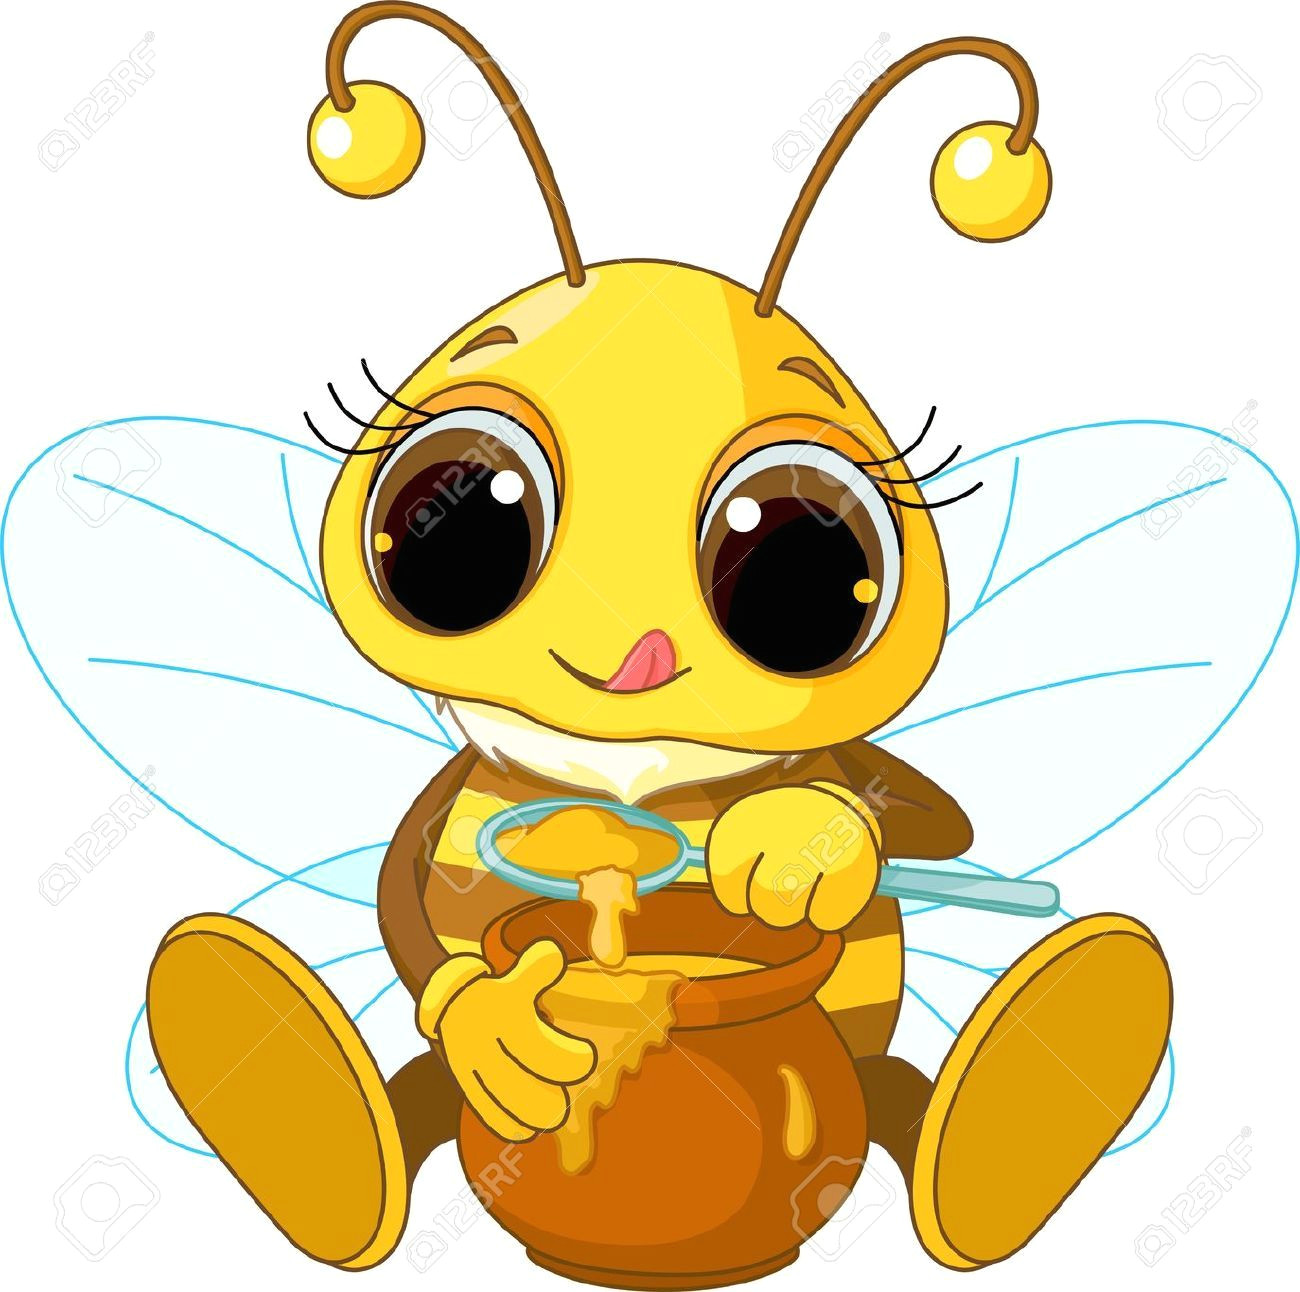 Drawing A Cartoon Bumblebee Illustration Of Cute Bee Eating Honey Royalty Free Cliparts